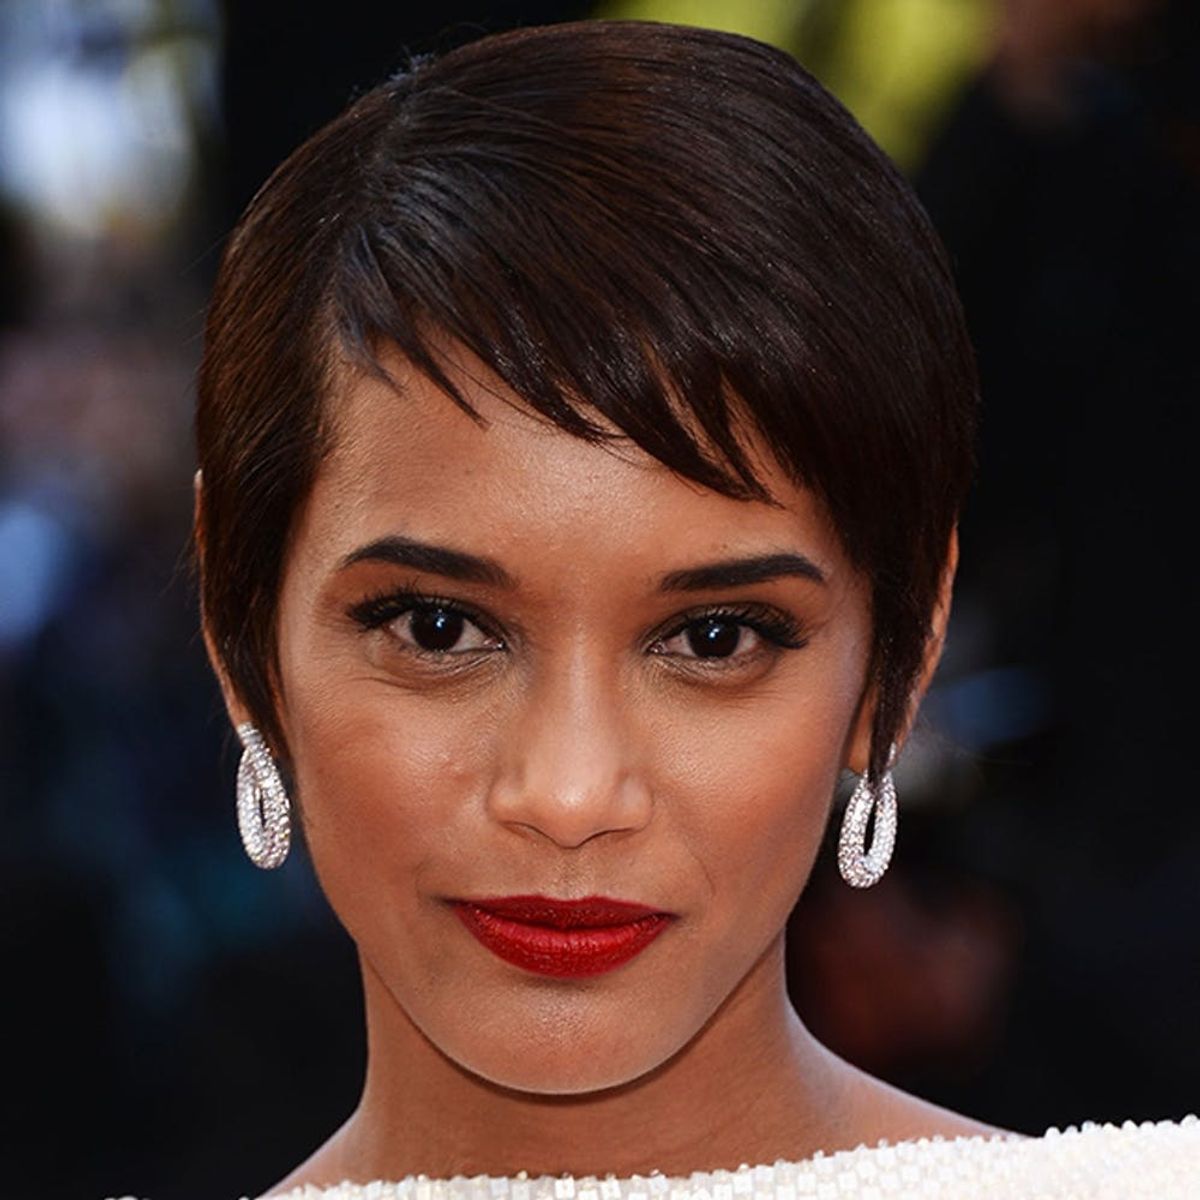 10 Types of Bangs Every Woman Should Try